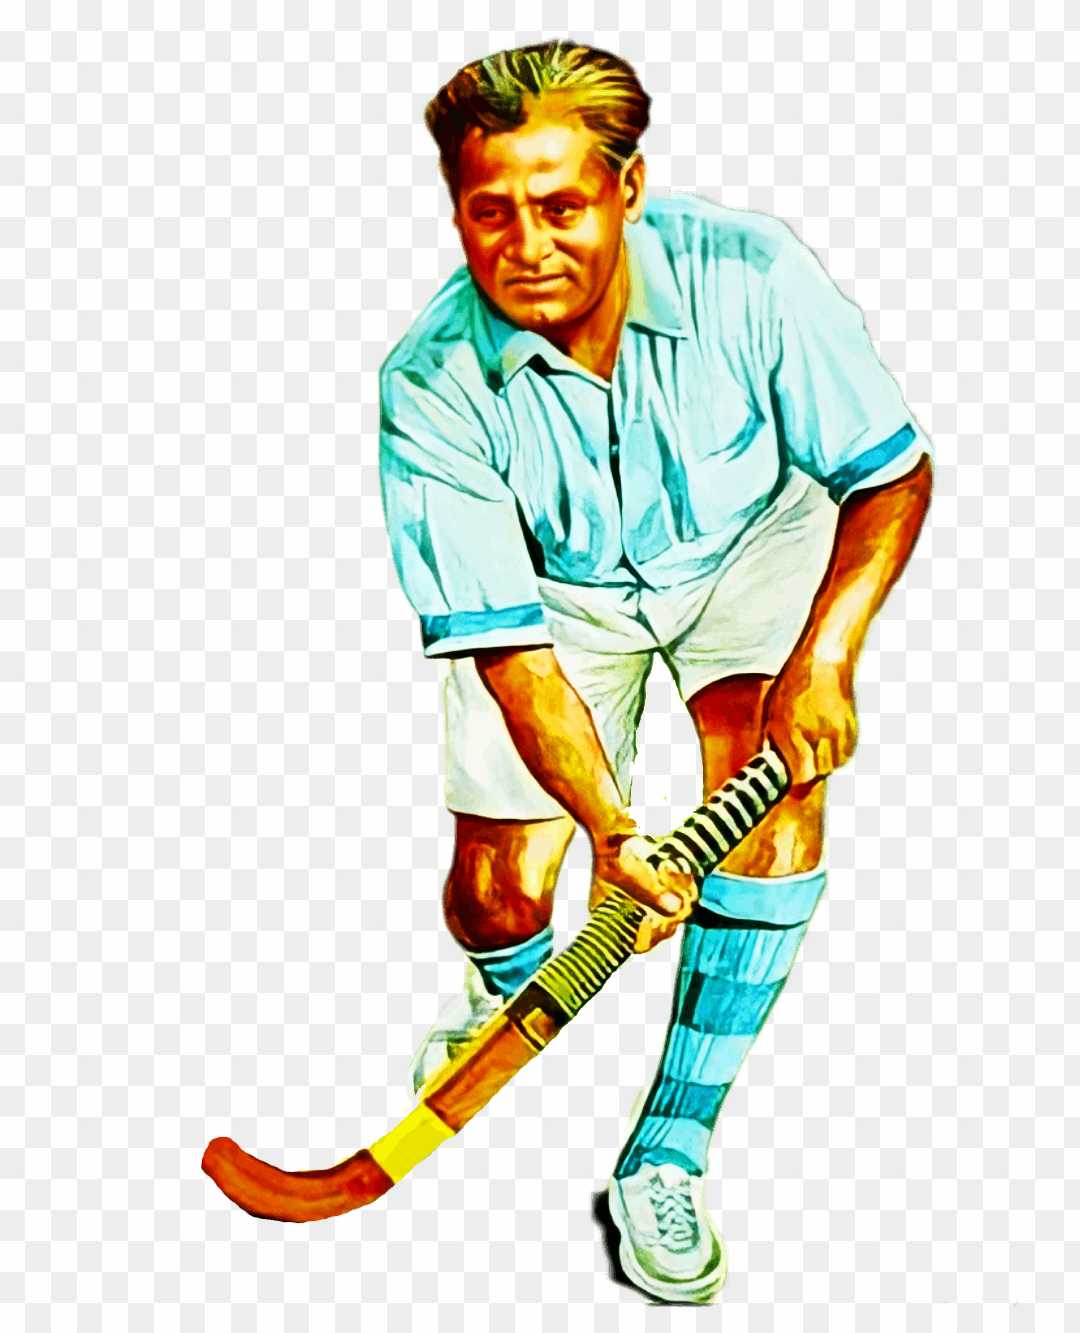 Major Dhyan Chand hd png images download